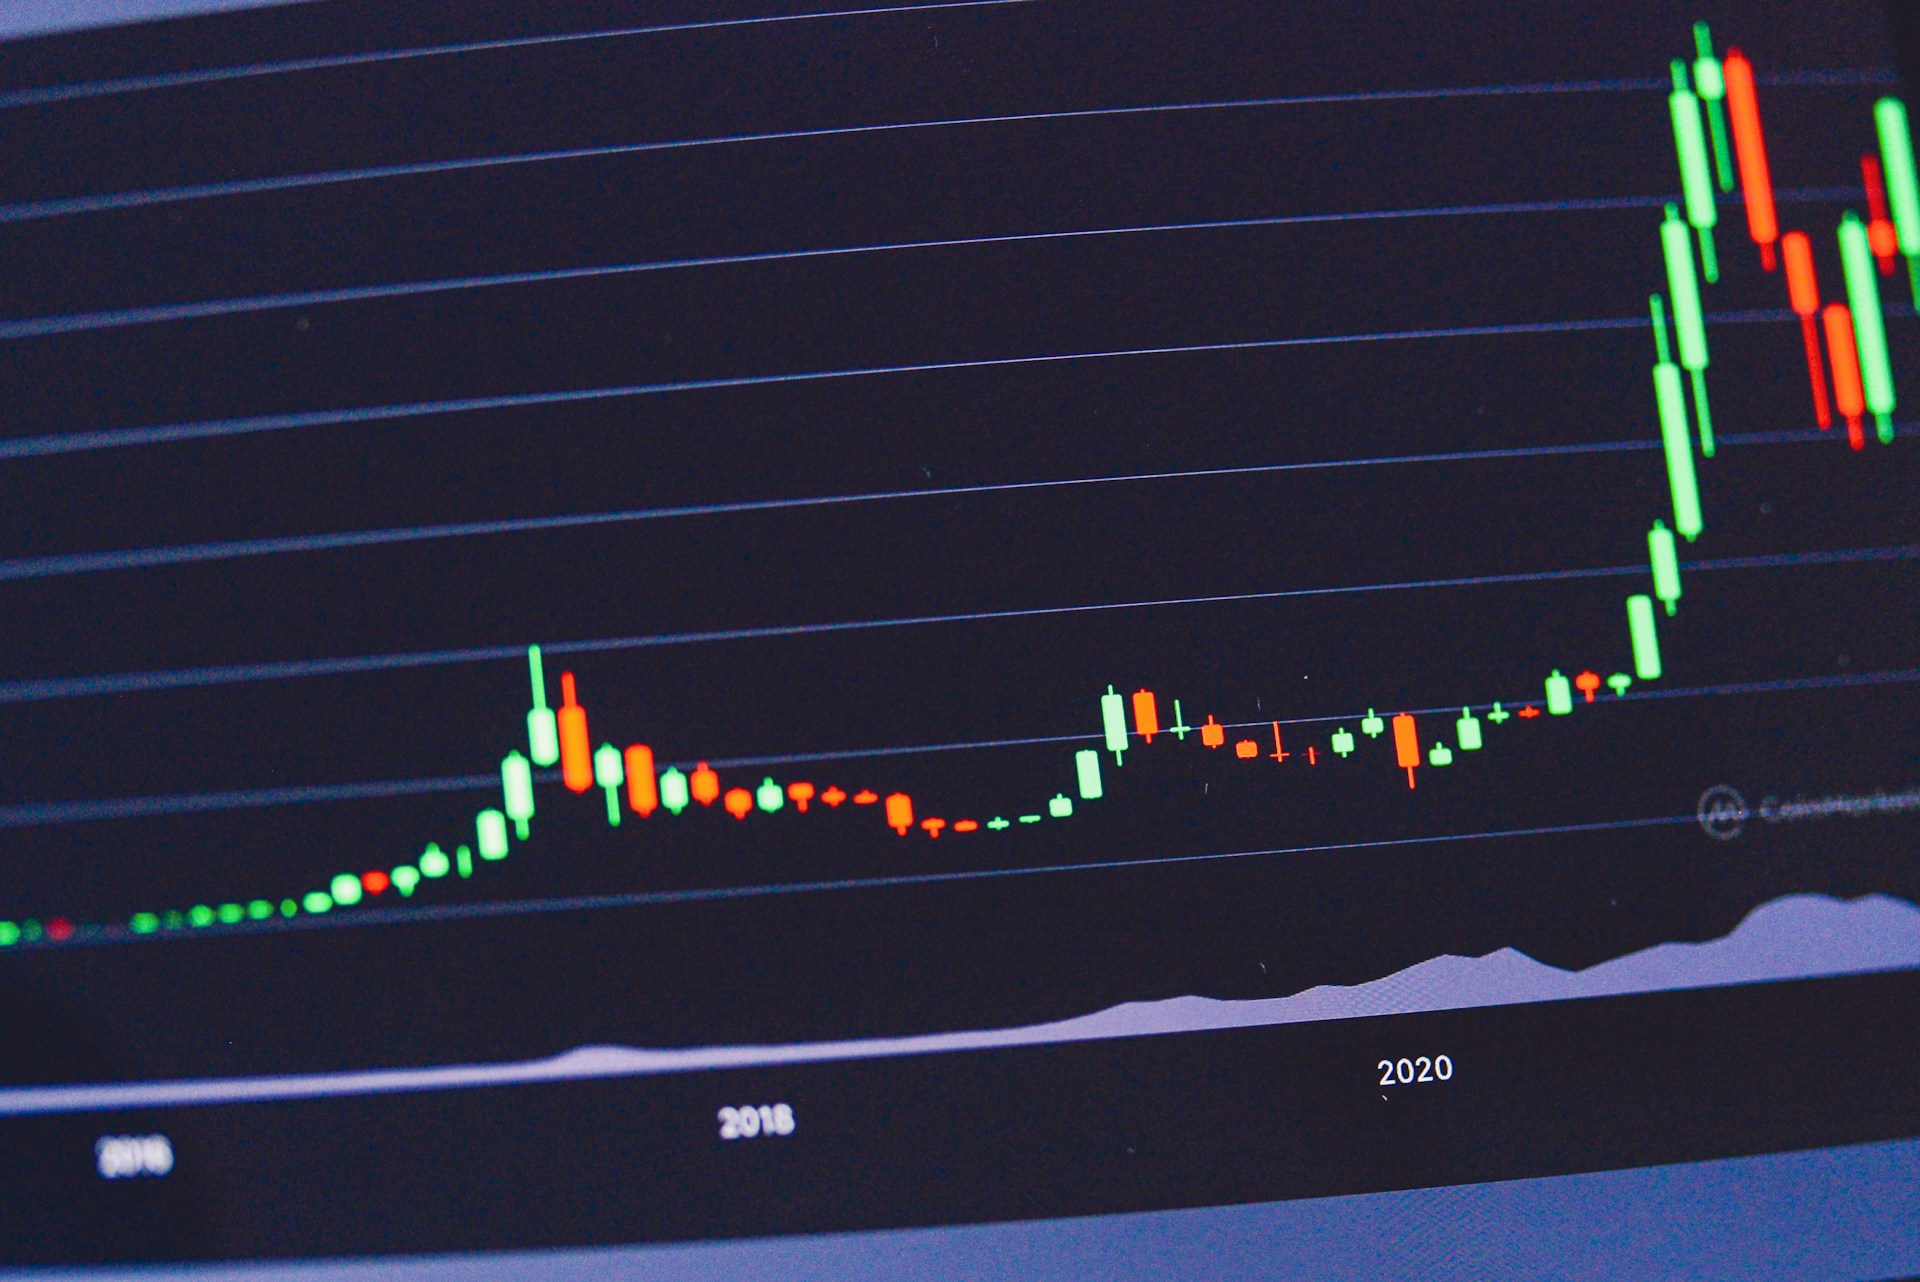 VeChain (VET) Price Prediction: Analyst Forecasts Potential Bull Run for VET- Will History Repeat Itself?